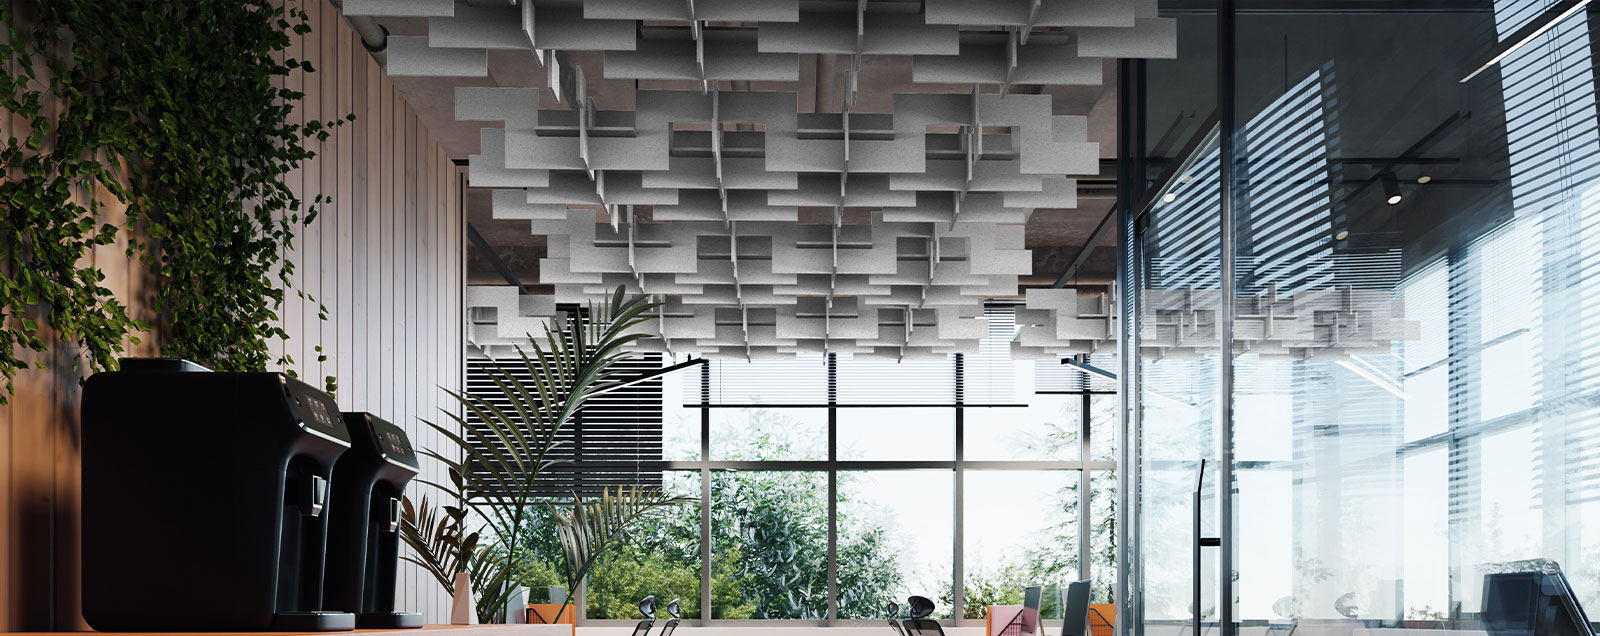 14six8 Blog Header How Can a Suspended Ceiling Improve Room Acoustics